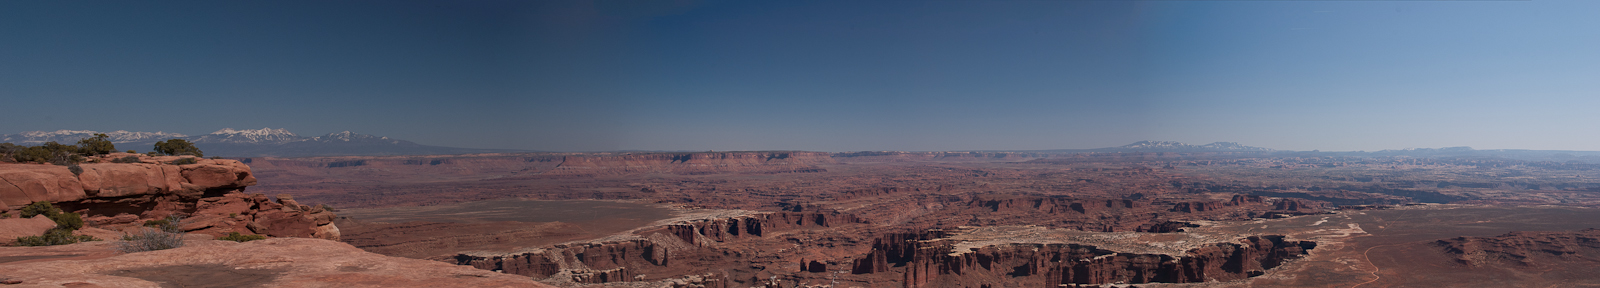 Isle of the Sky,
Canyonlands